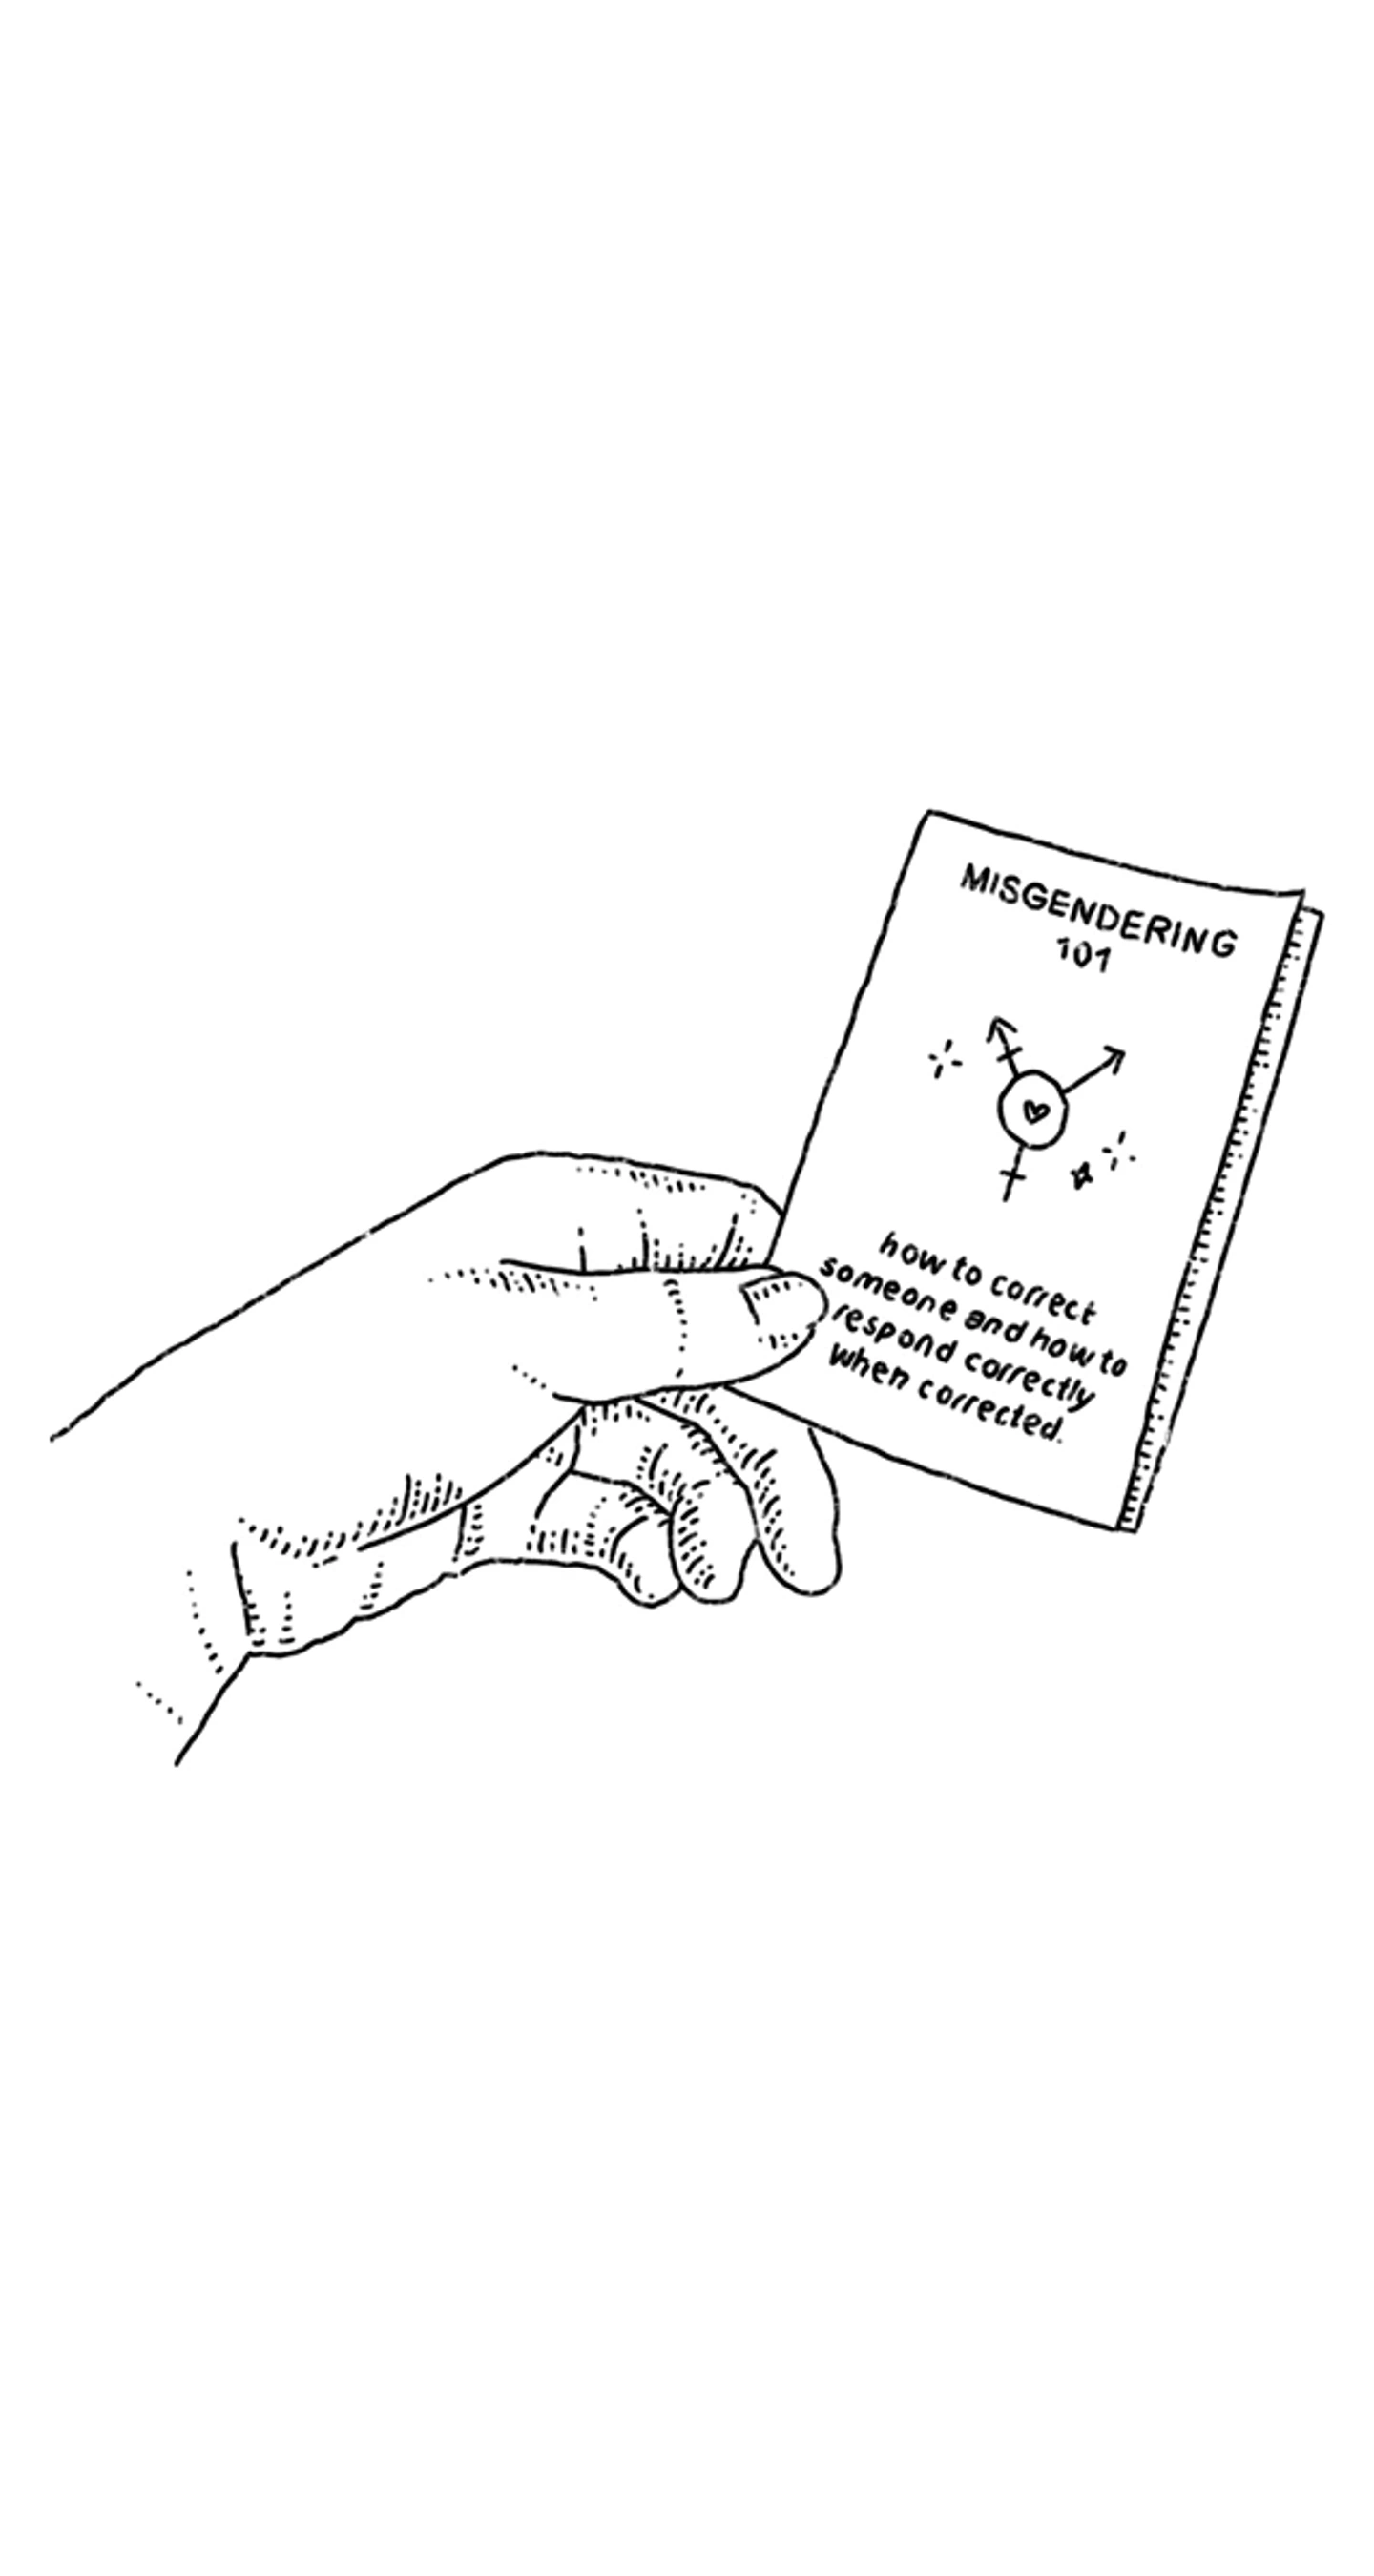 A hand holding a zine that reads "MISGENDERING 101 - HOW TO CORRECT SOMEONE AND HOW TO RESPOND CORRECTLY WHEN CORRECTED."